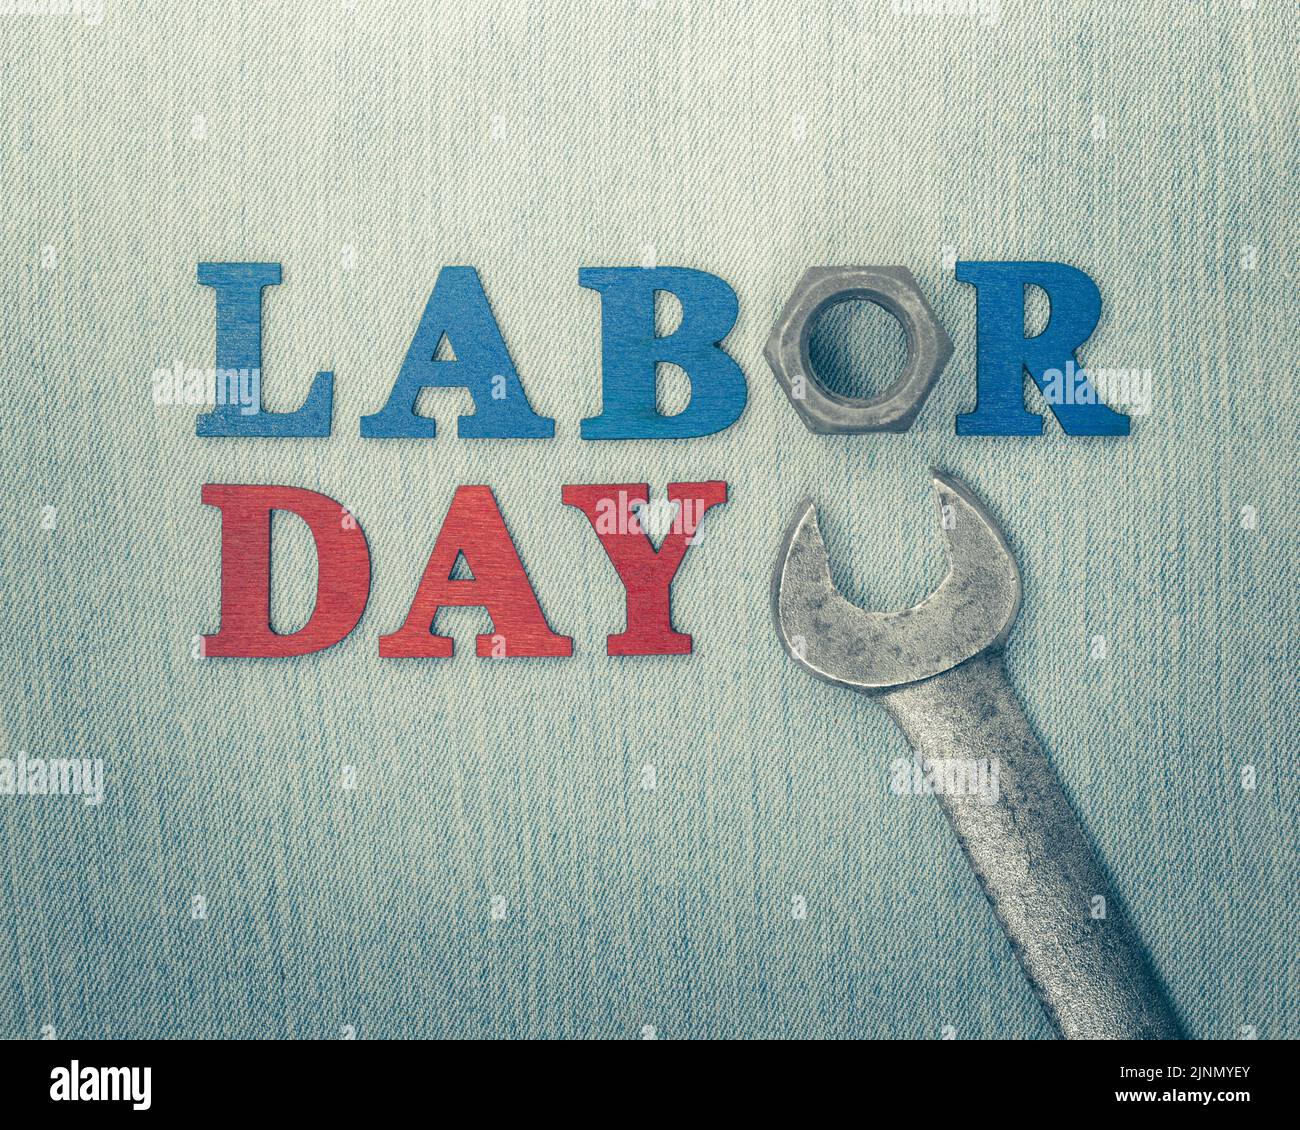 Worn and weathered wrench with Labor Day text, celebrating American workers. Stock Photo